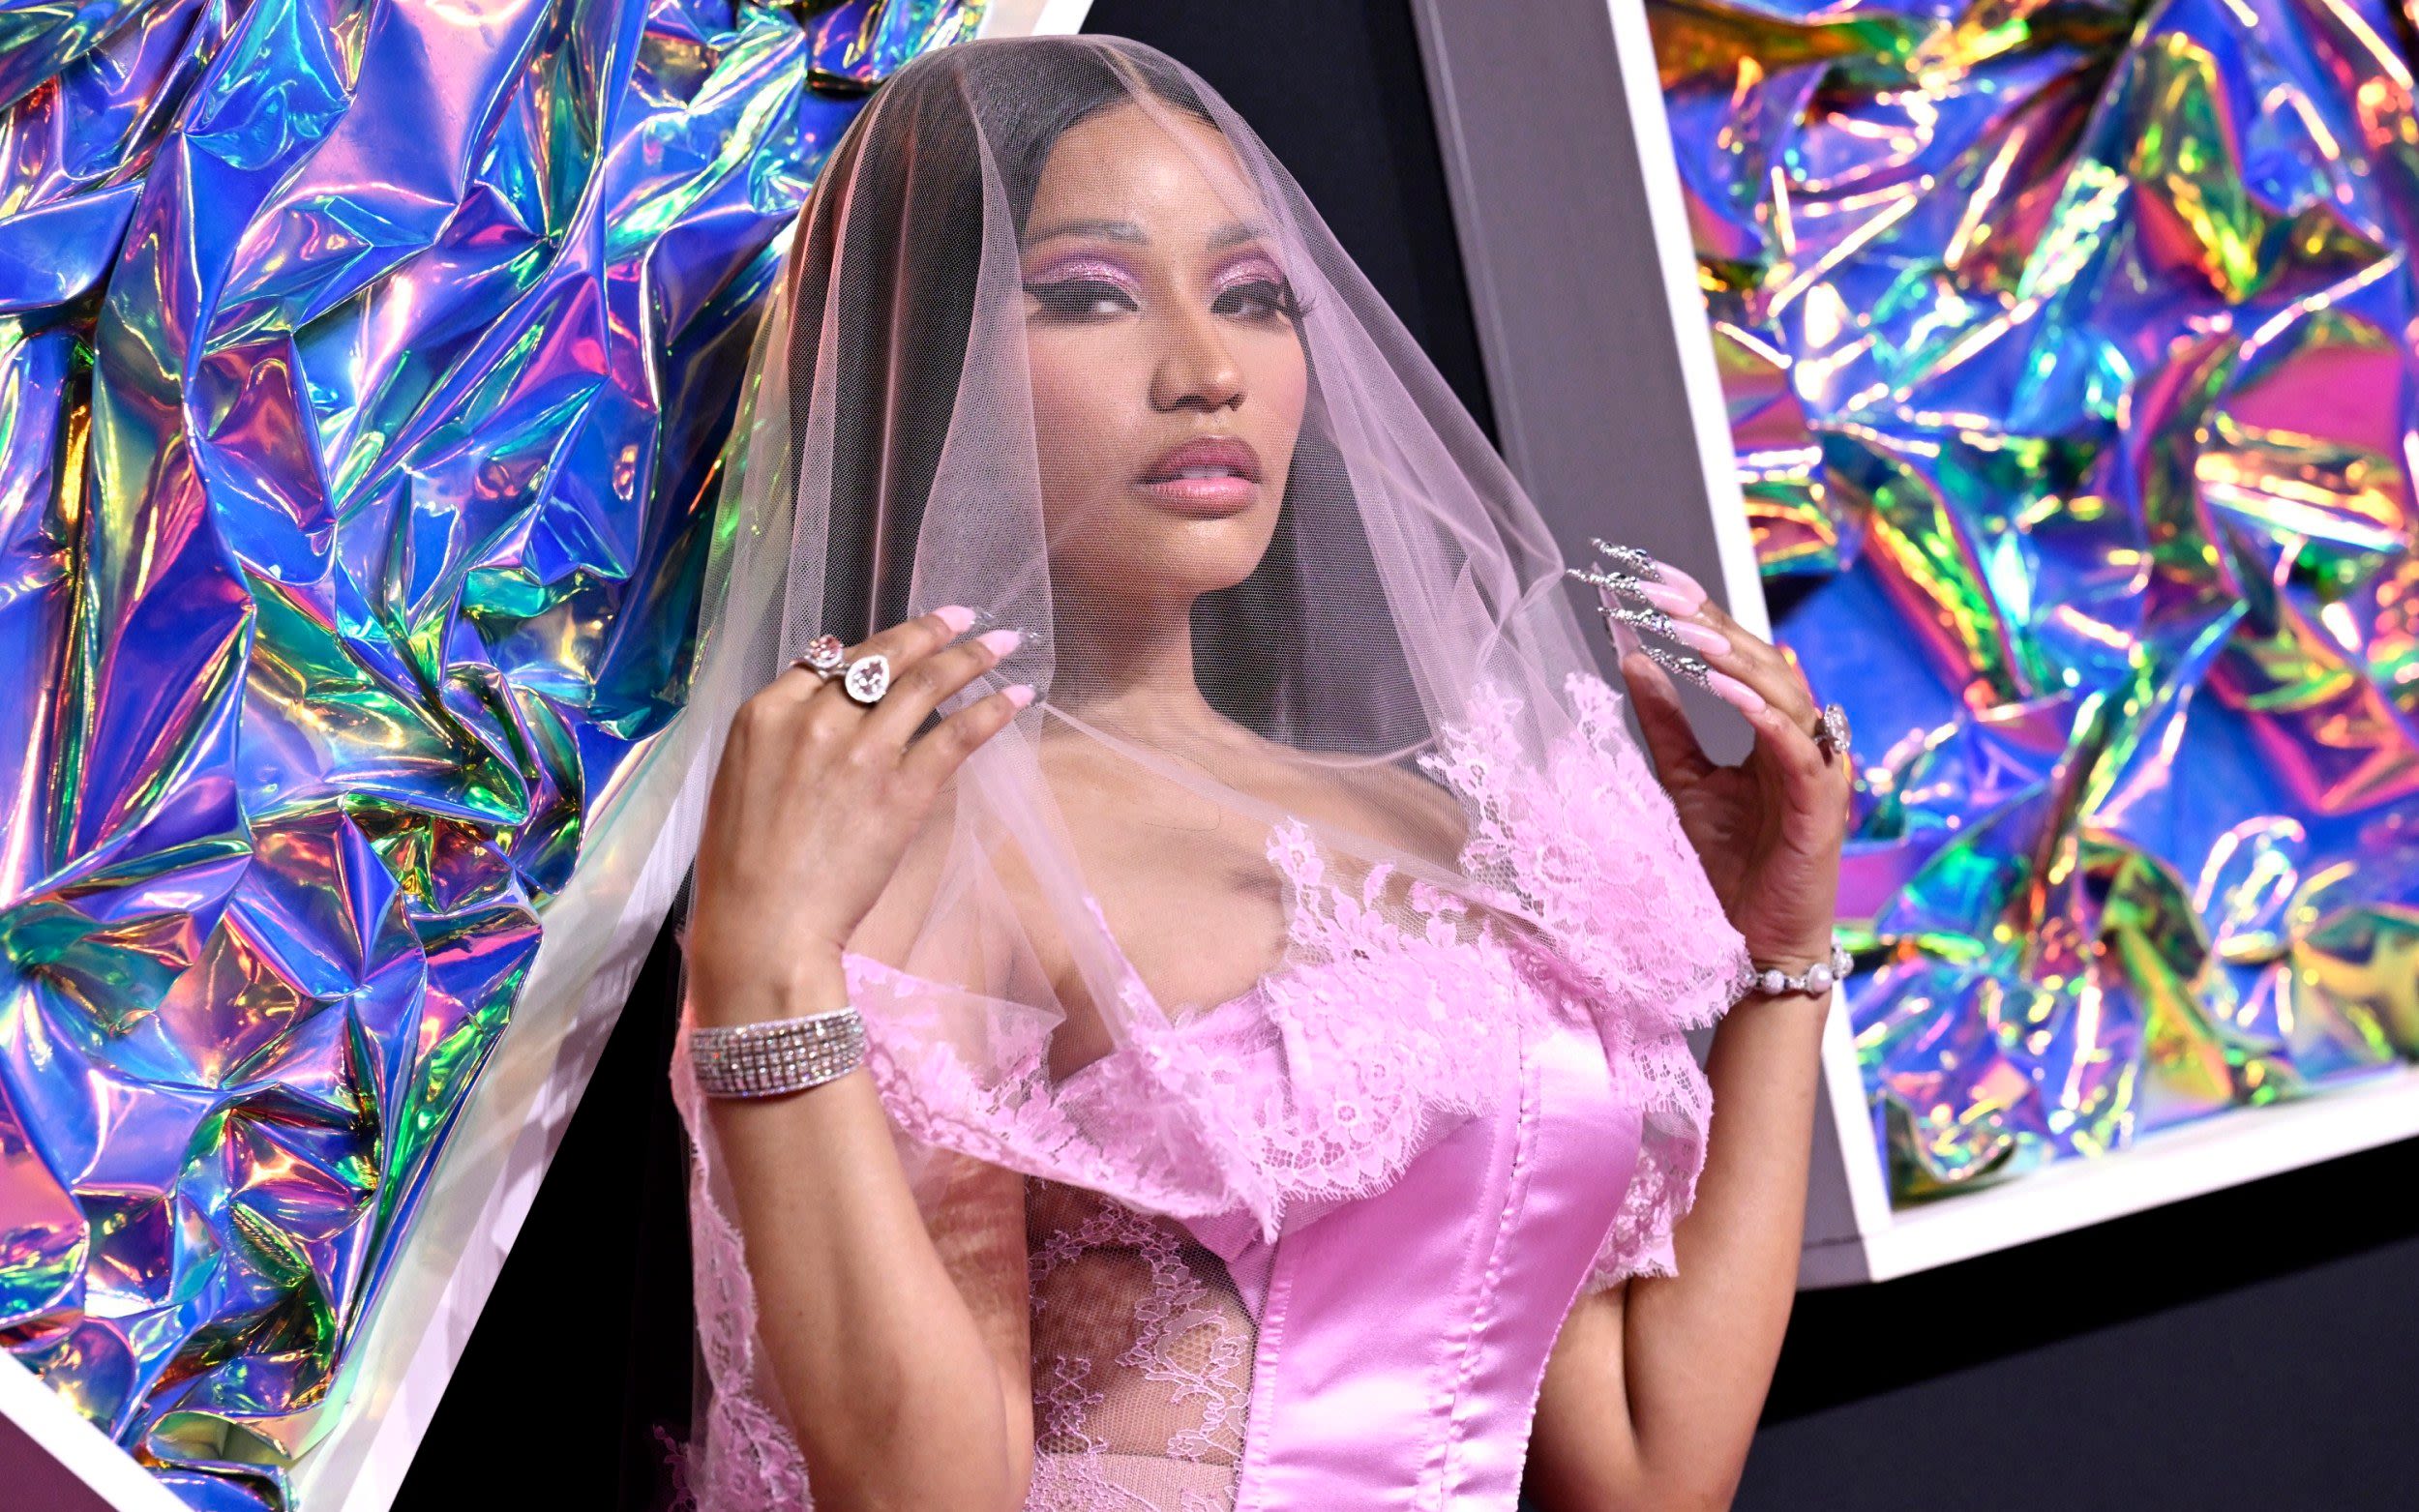 ‘They are trying to keep me from Manchester’ – inside the unpredictable world of Nicki Minaj